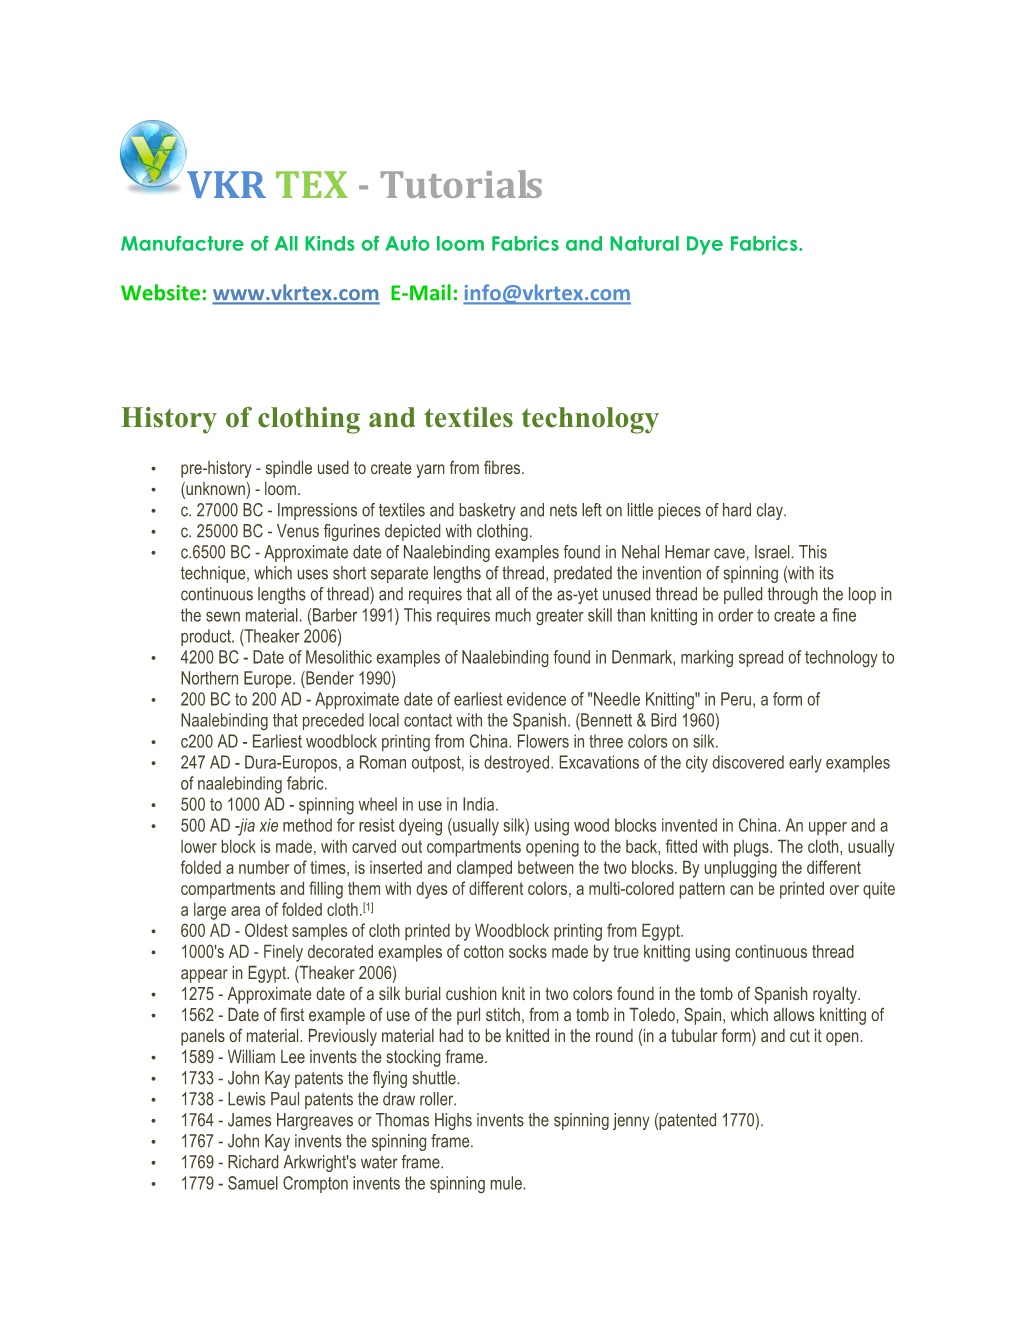 History of Clothing and Textiles Technology